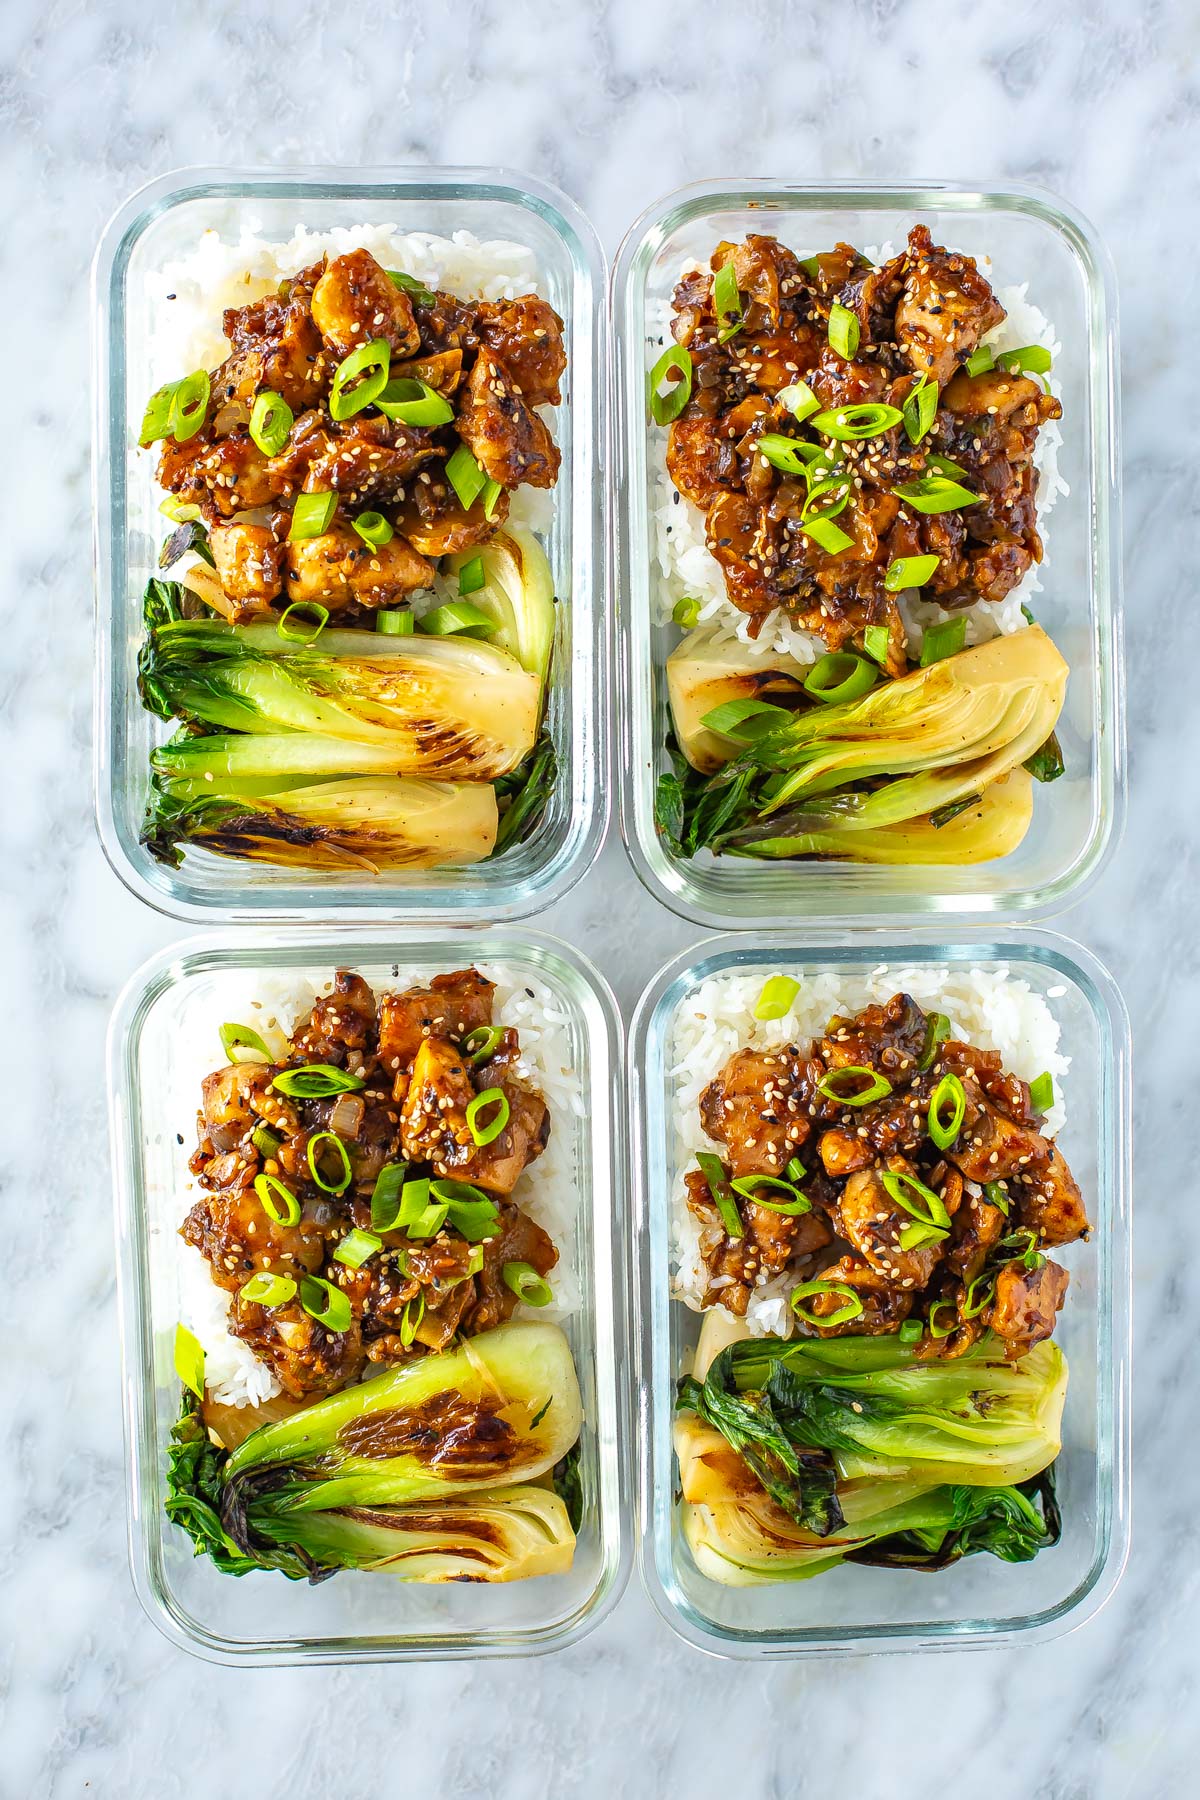 4 meal prep containers, each with a serving of ginger chicken, bok choy and rice.